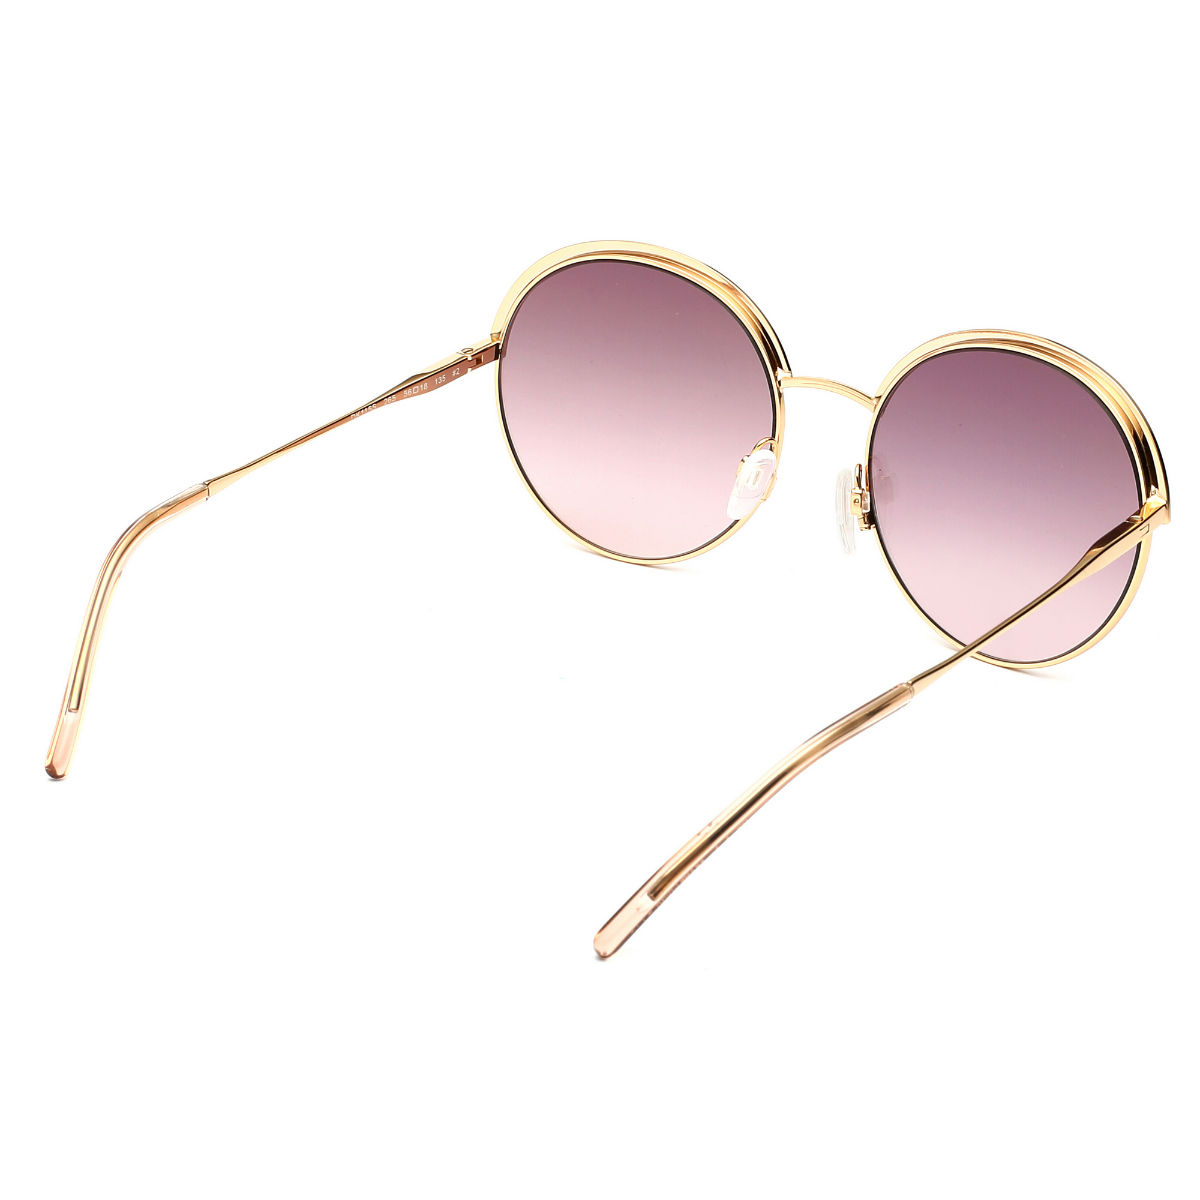 Buy Round Pink Lens Sunglasses S Rose Gold Frame at Amazon.in